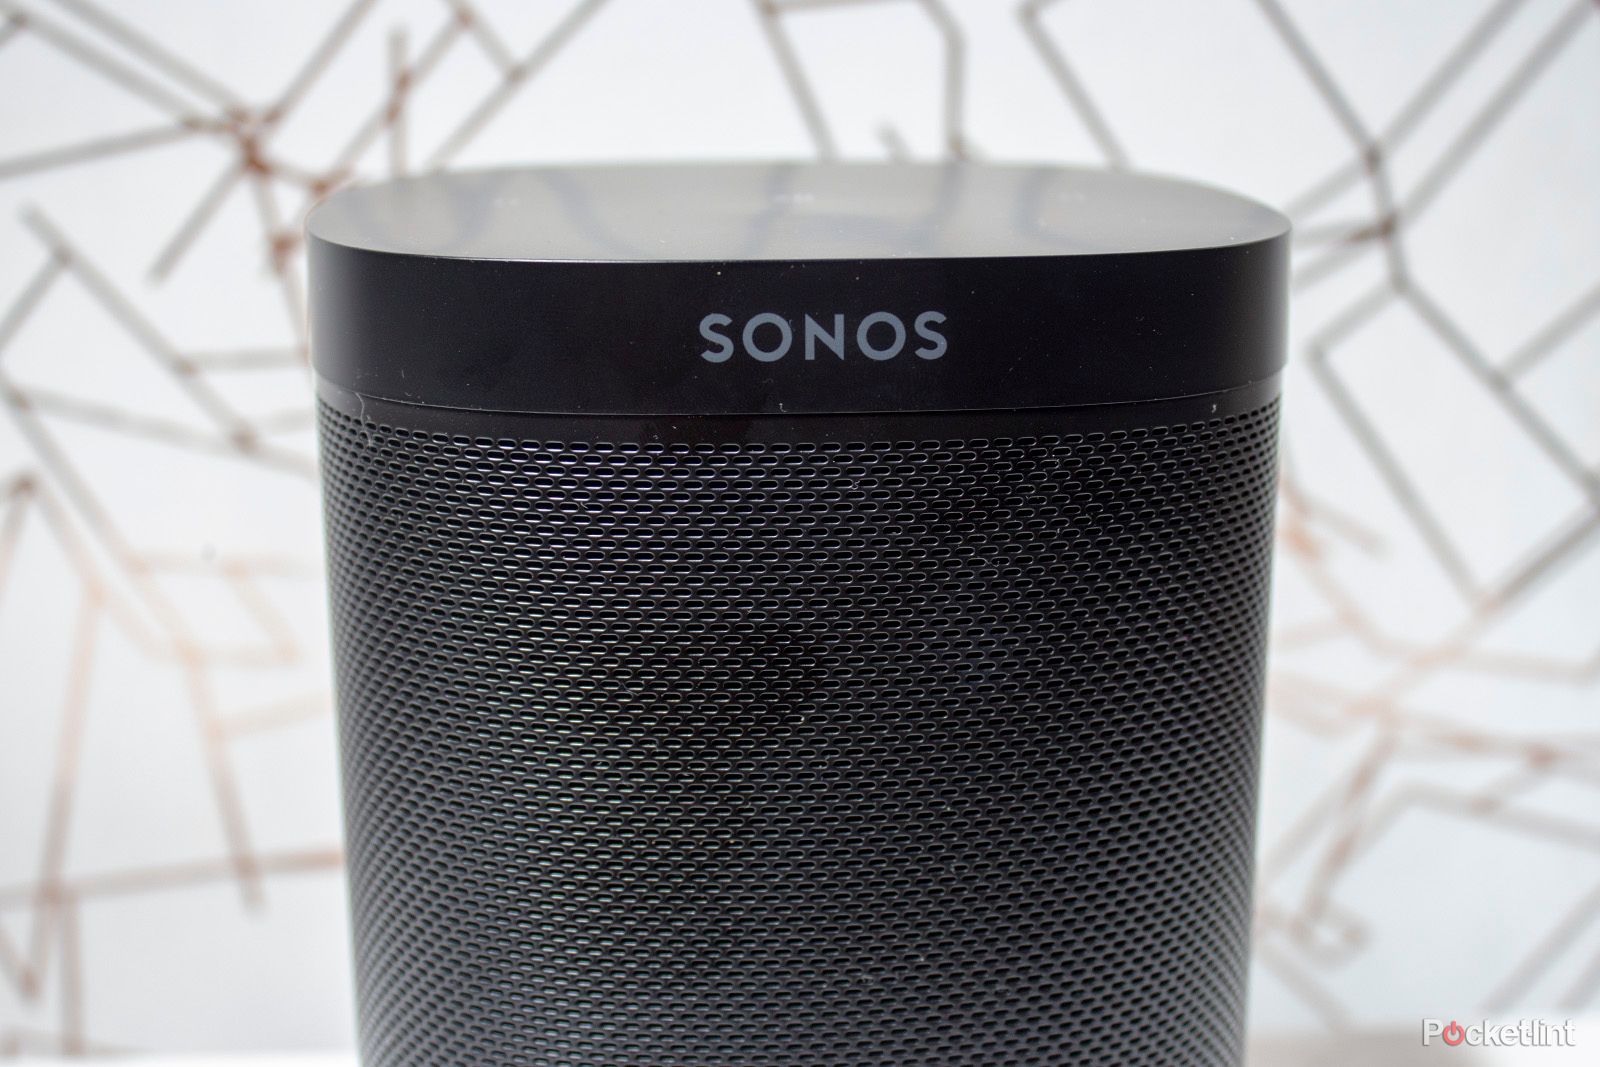 Sonos might launch Sonos Voice assistant with 'Hey Sonos' wake word soon photo 1